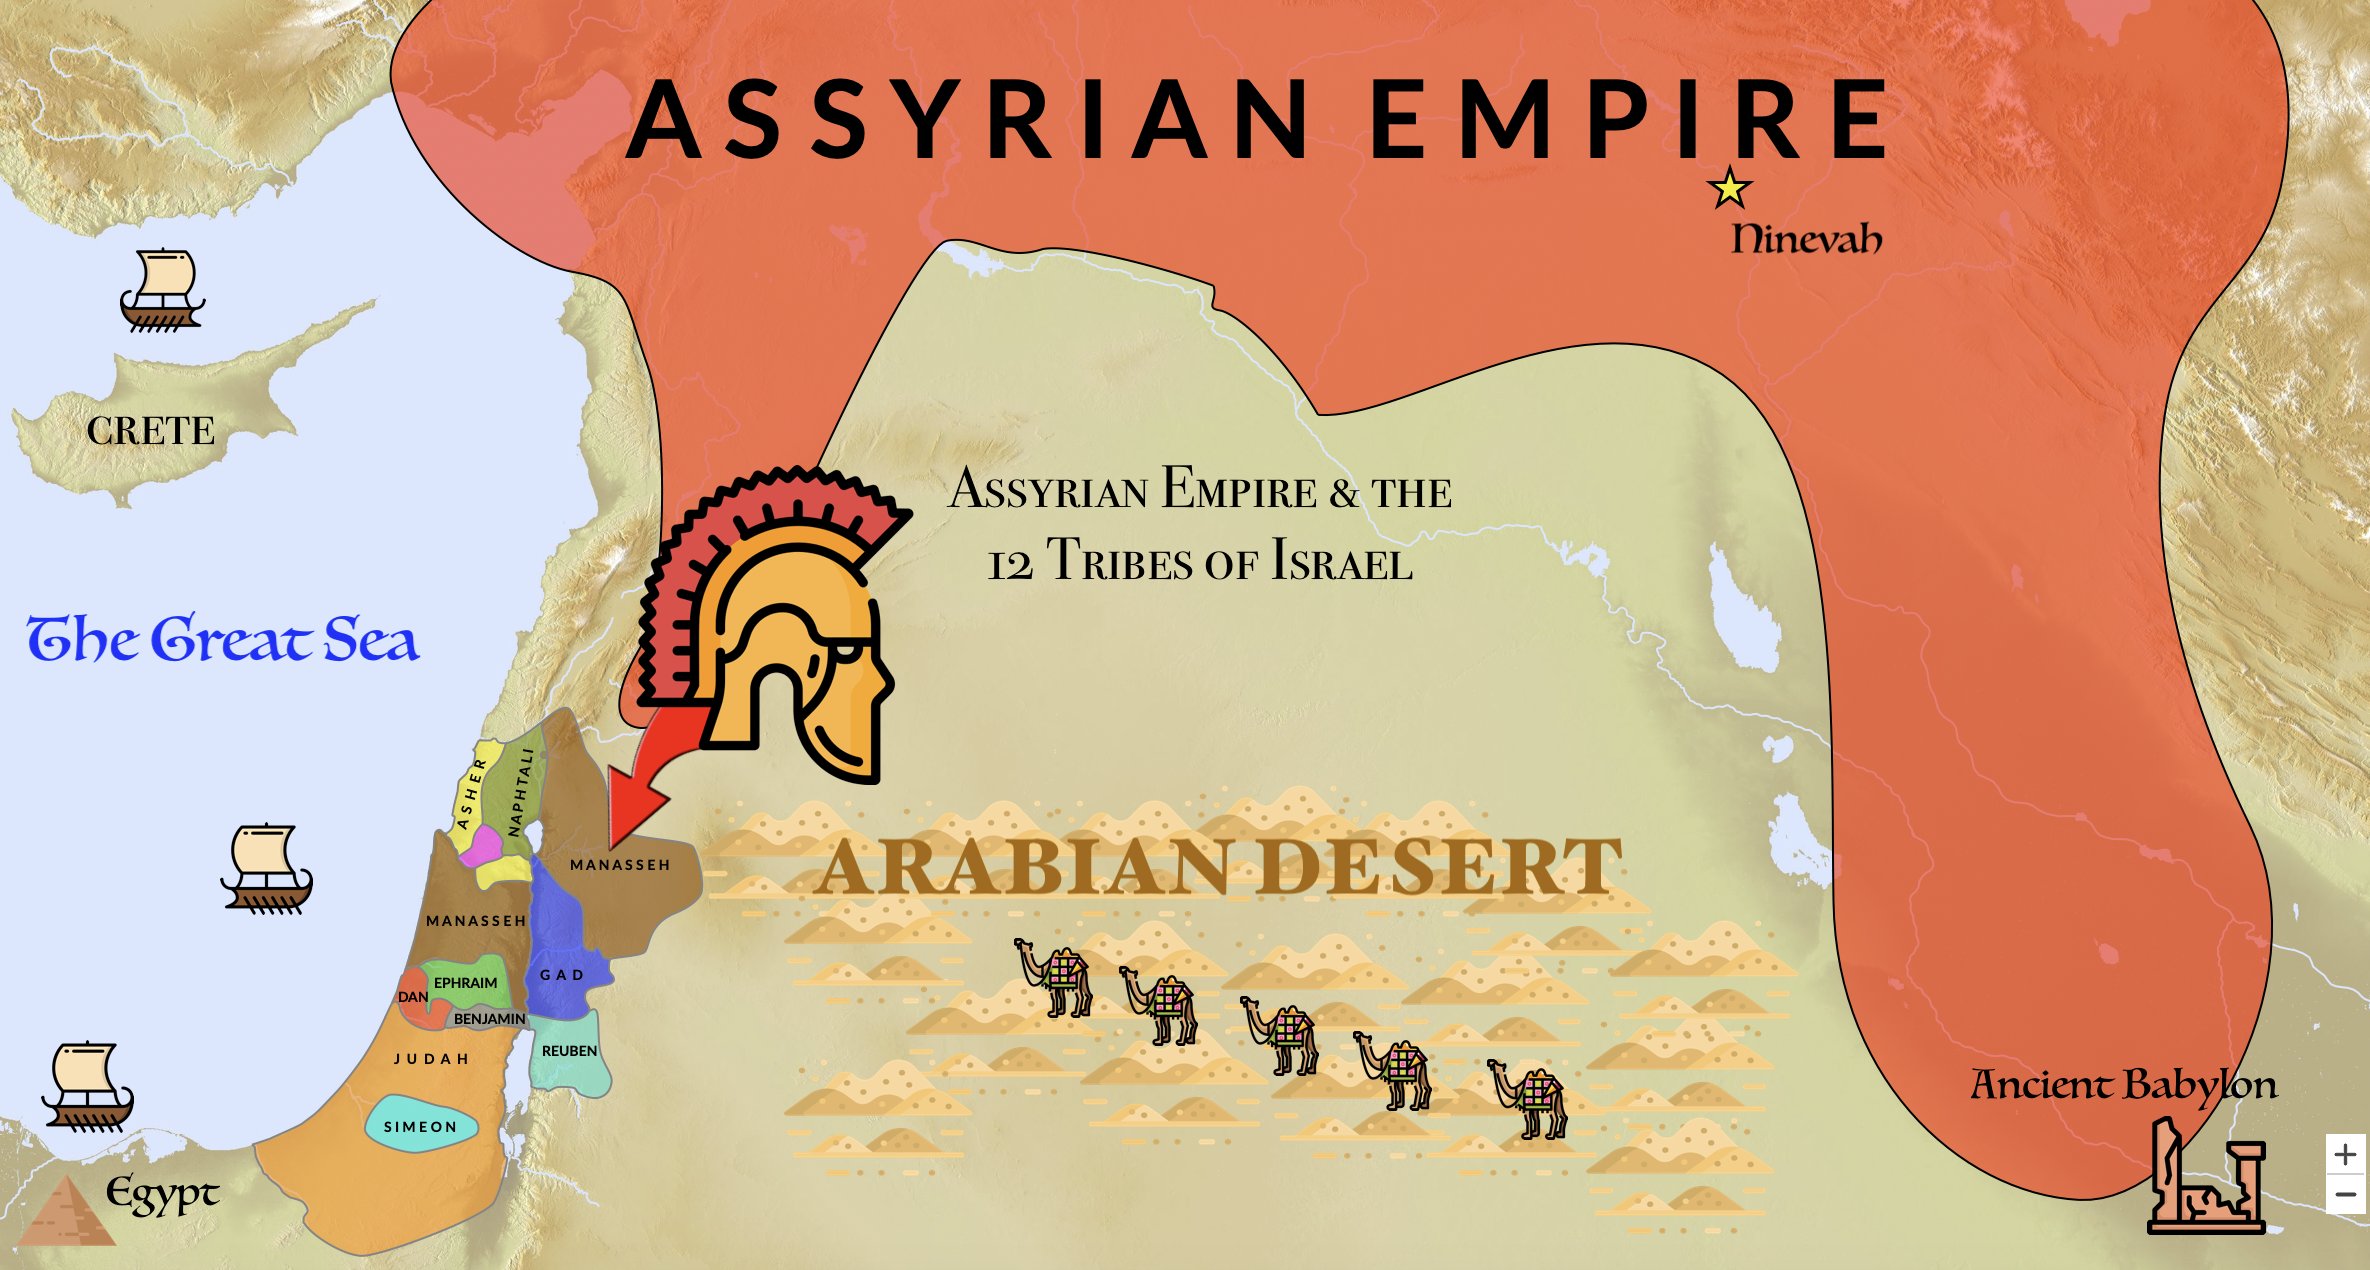 The Assyrian Empire compared to the twelve tribes of Israel.